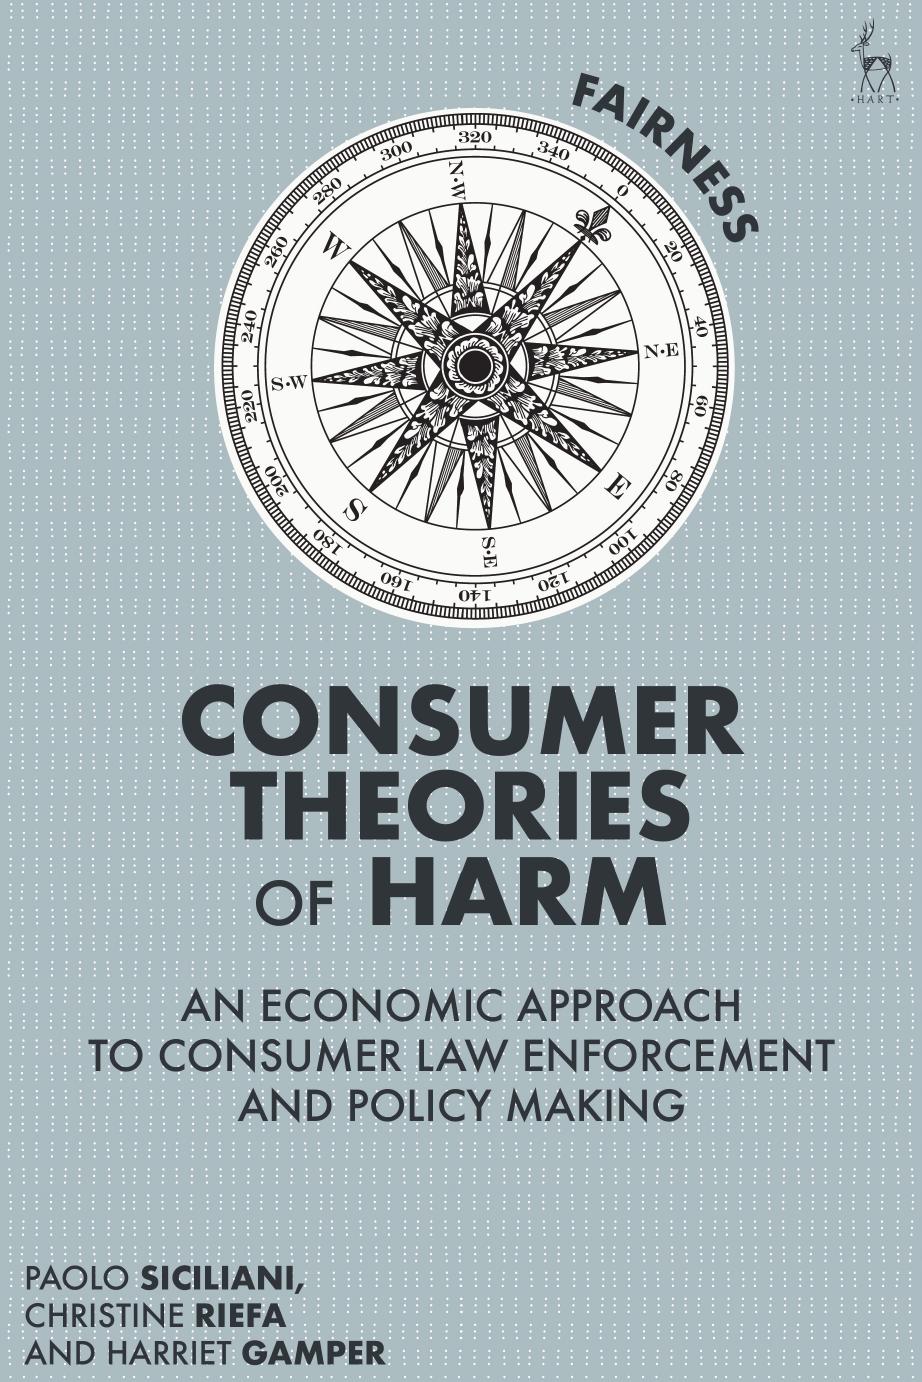 Consumer Theories of Harm: An Economic Approach to Consumer Law Enforcement and Policy Making by Paolo Siciliani; Christine Riefa; Harriet Gamper